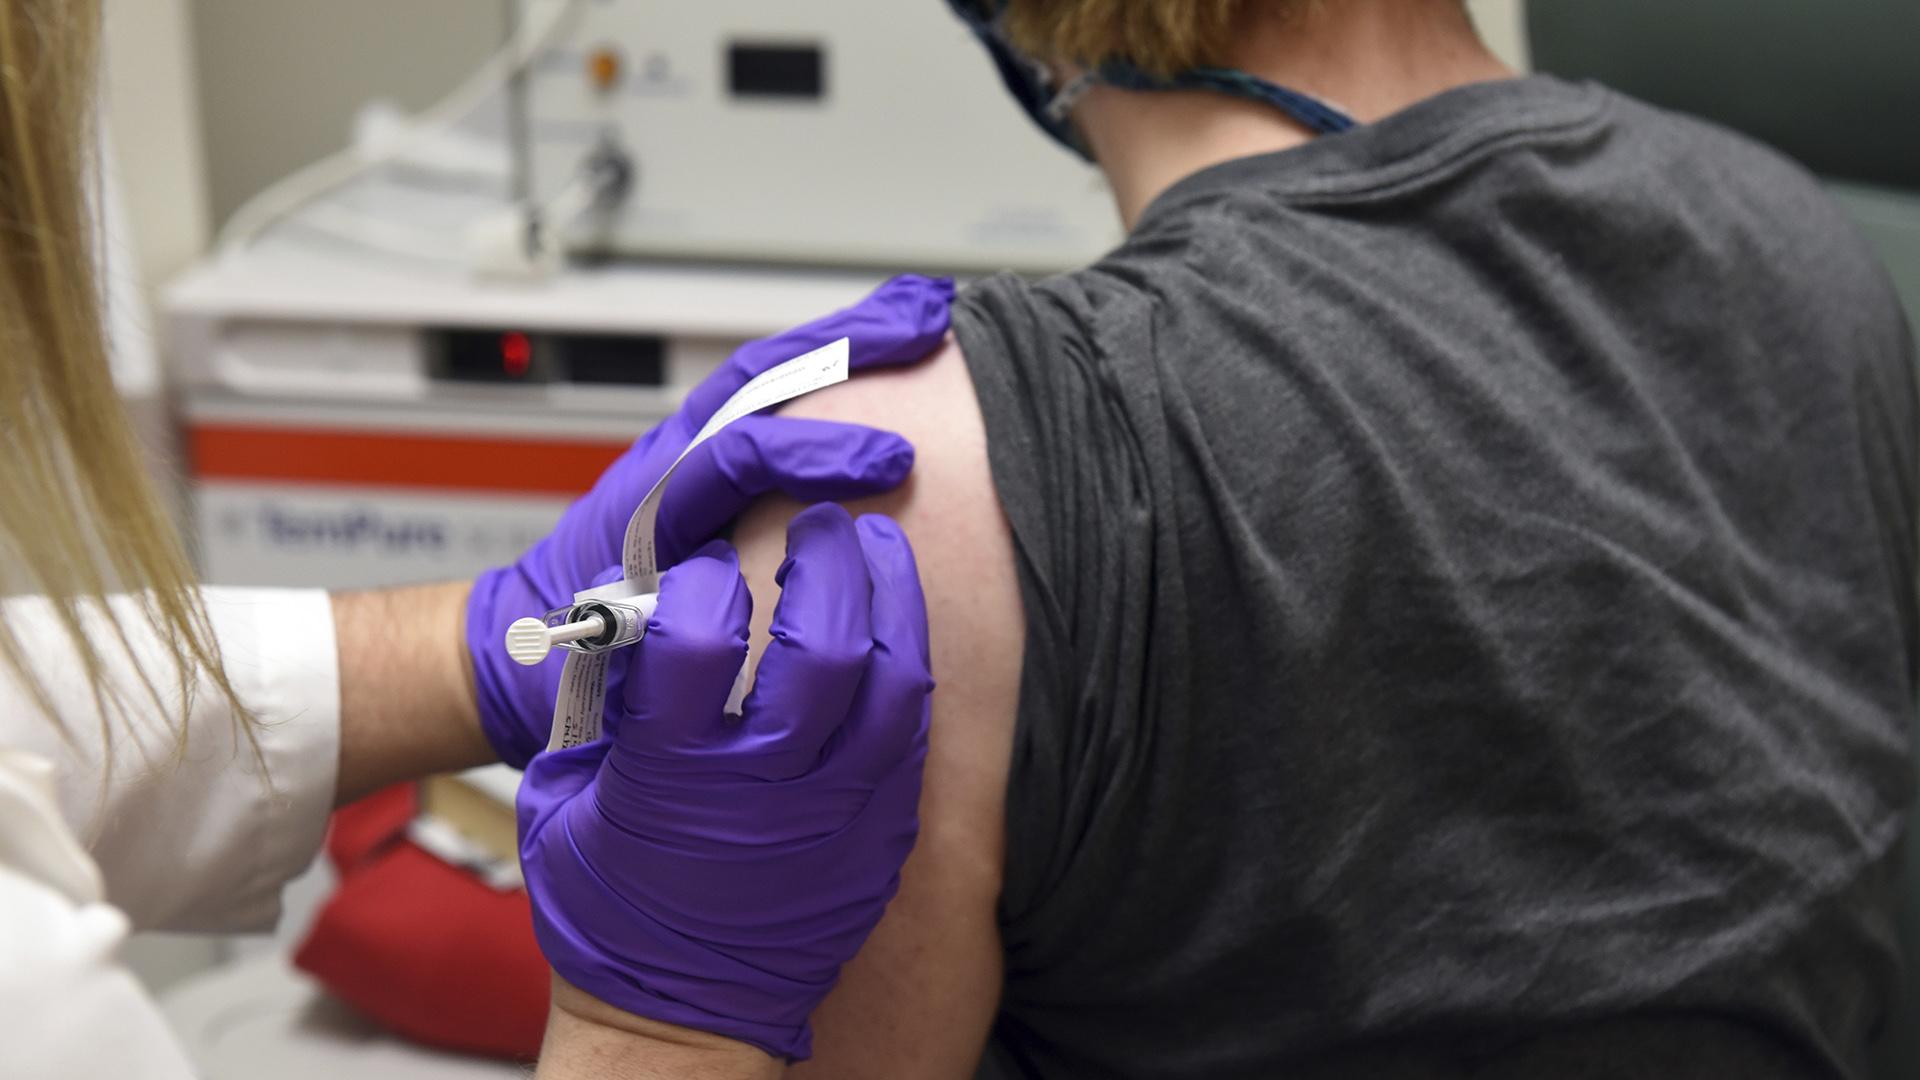 This May 4, 2020 photo from the University of Maryland School of Medicine, the first patient enrolled in Pfizer’s COVID-19 coronavirus vaccine clinical trial at the University of Maryland School of Medicine in Baltimore, receives an injection. (University of Maryland School of Medicine via AP)